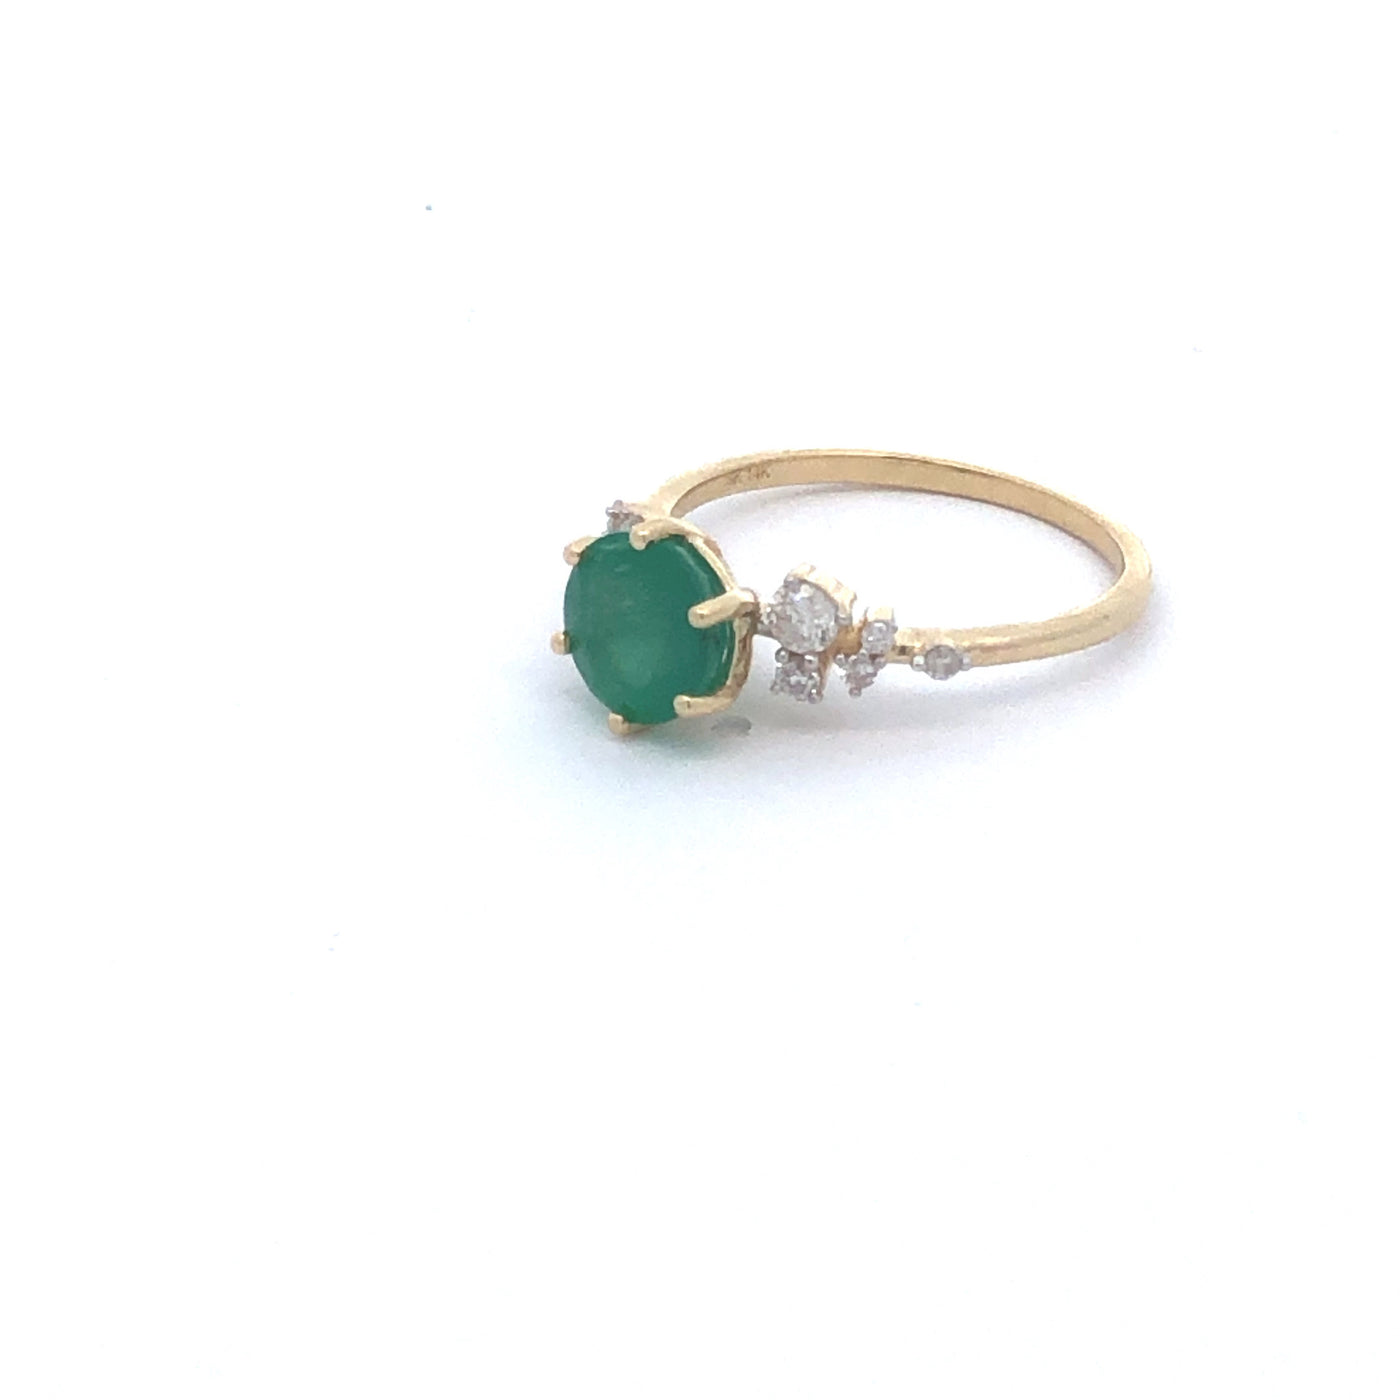 14Ct Yellow Gold Natural Emerald And Diamond Ring. Emerald = 1.33Ct. Tdw Dia - 0.20Ct